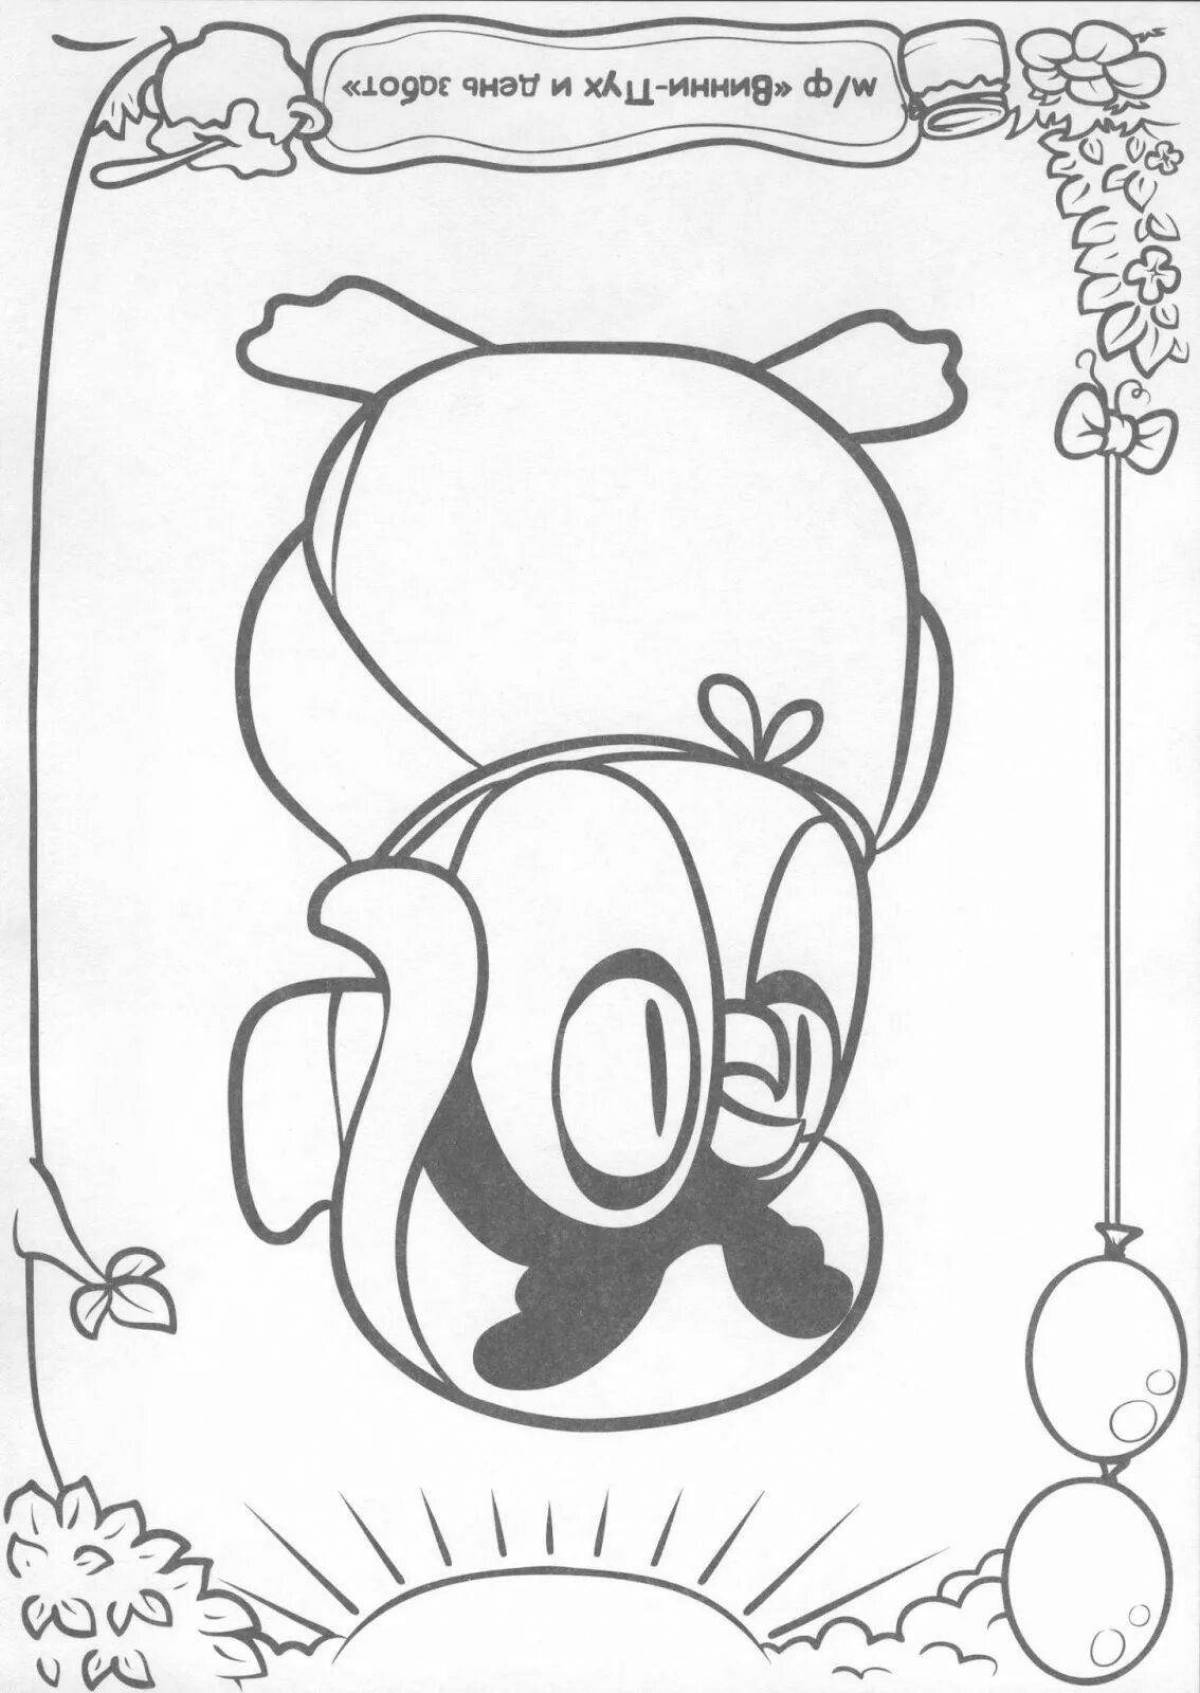 Sensational Winnie the Pooh Owl coloring book